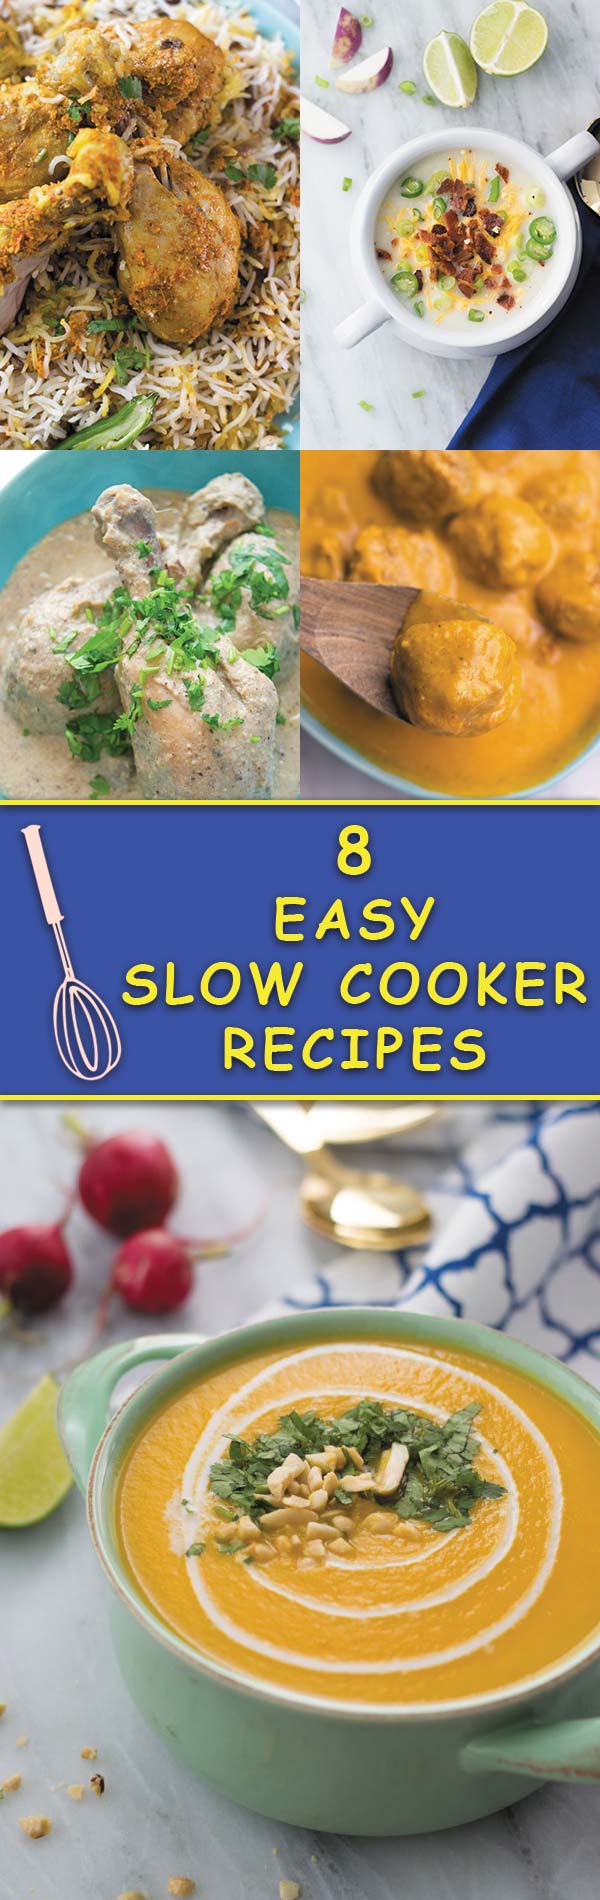 8 Easy Slow Cooker Recipes ->> Put your SLOW COOKER to work and enjoy a delicious comforting meal with just few minutes of prep work! Making DINNER was never this fun!